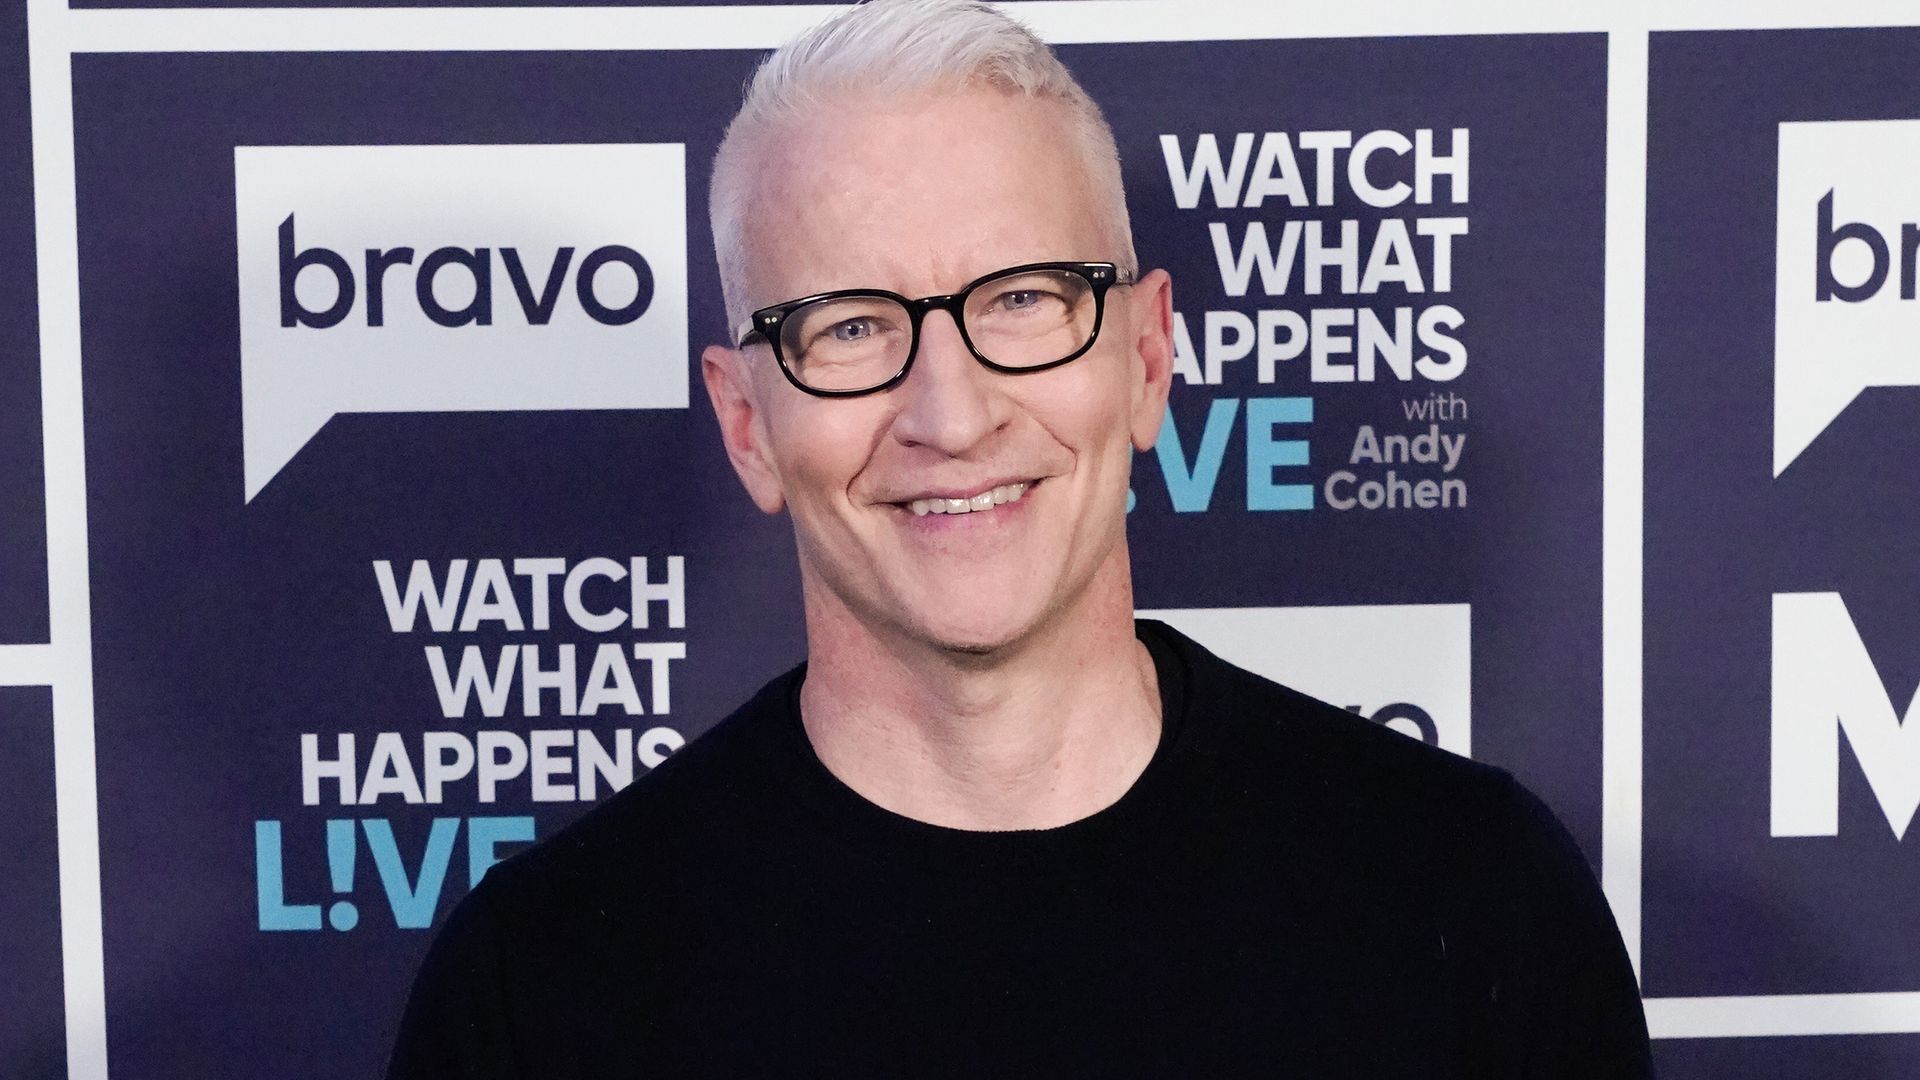 Anderson Cooper smiling at a photo call